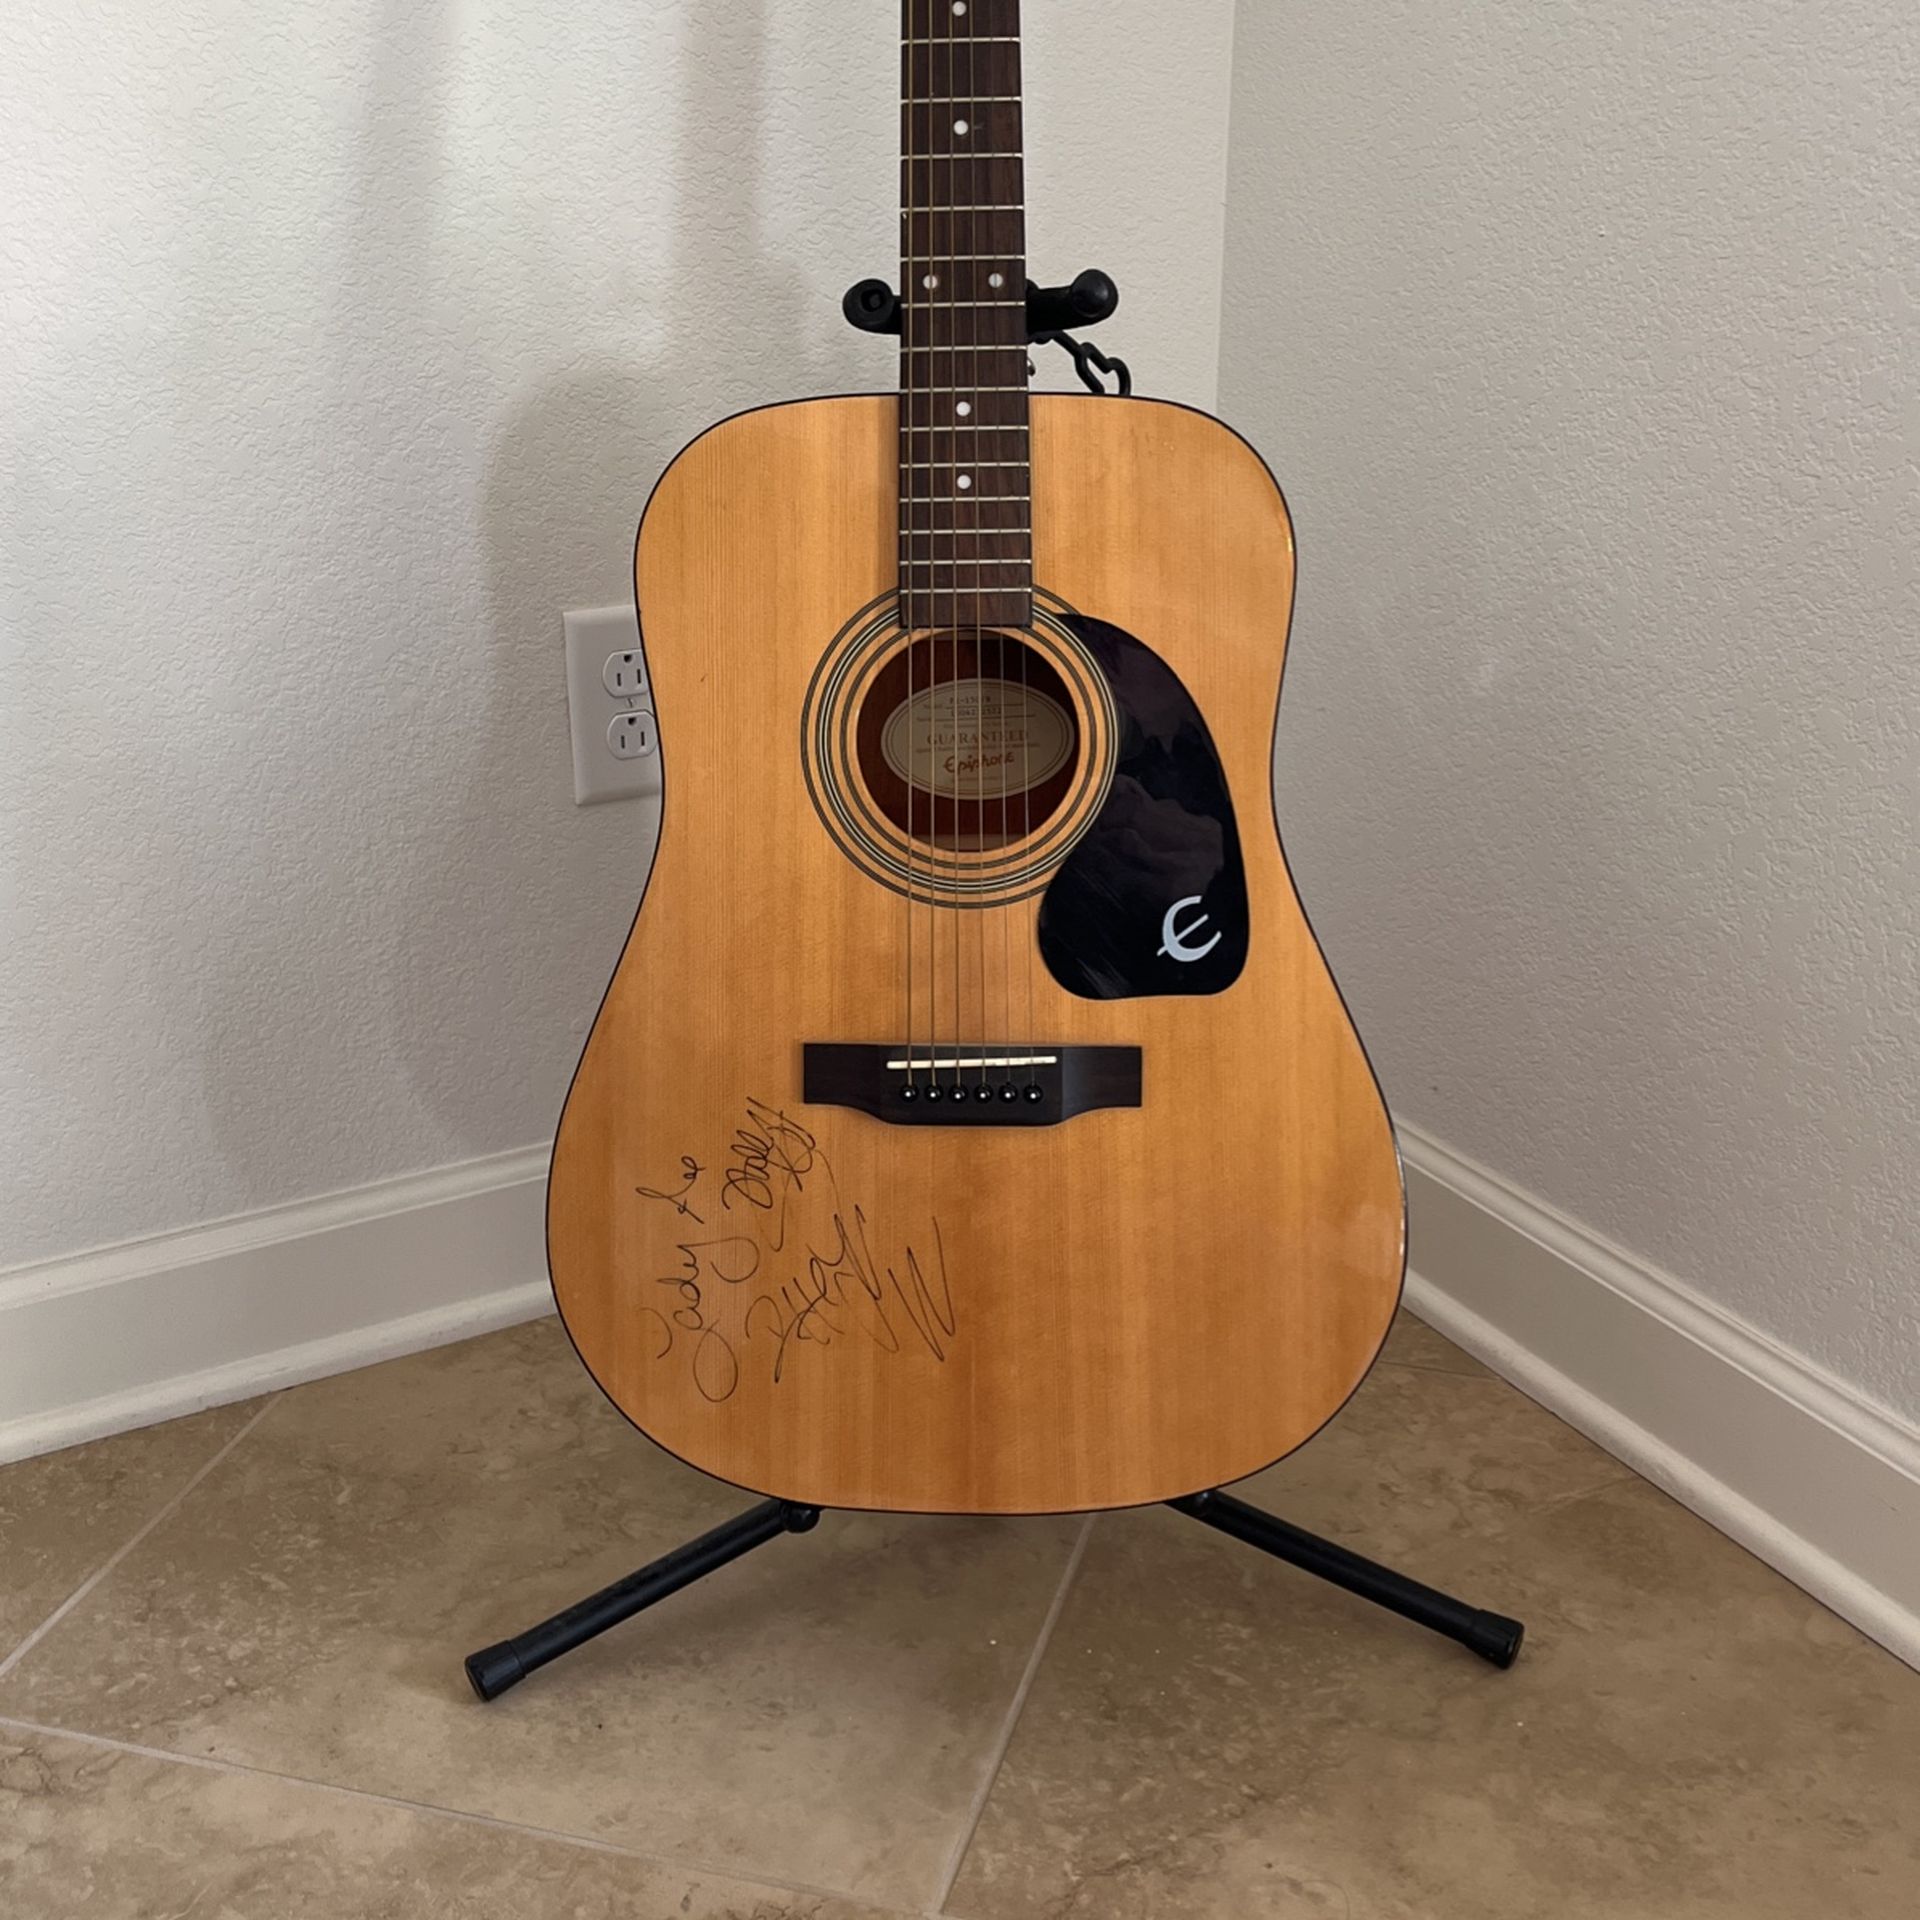 Epiphone acoustic guitar signed by Lady Antebellum 